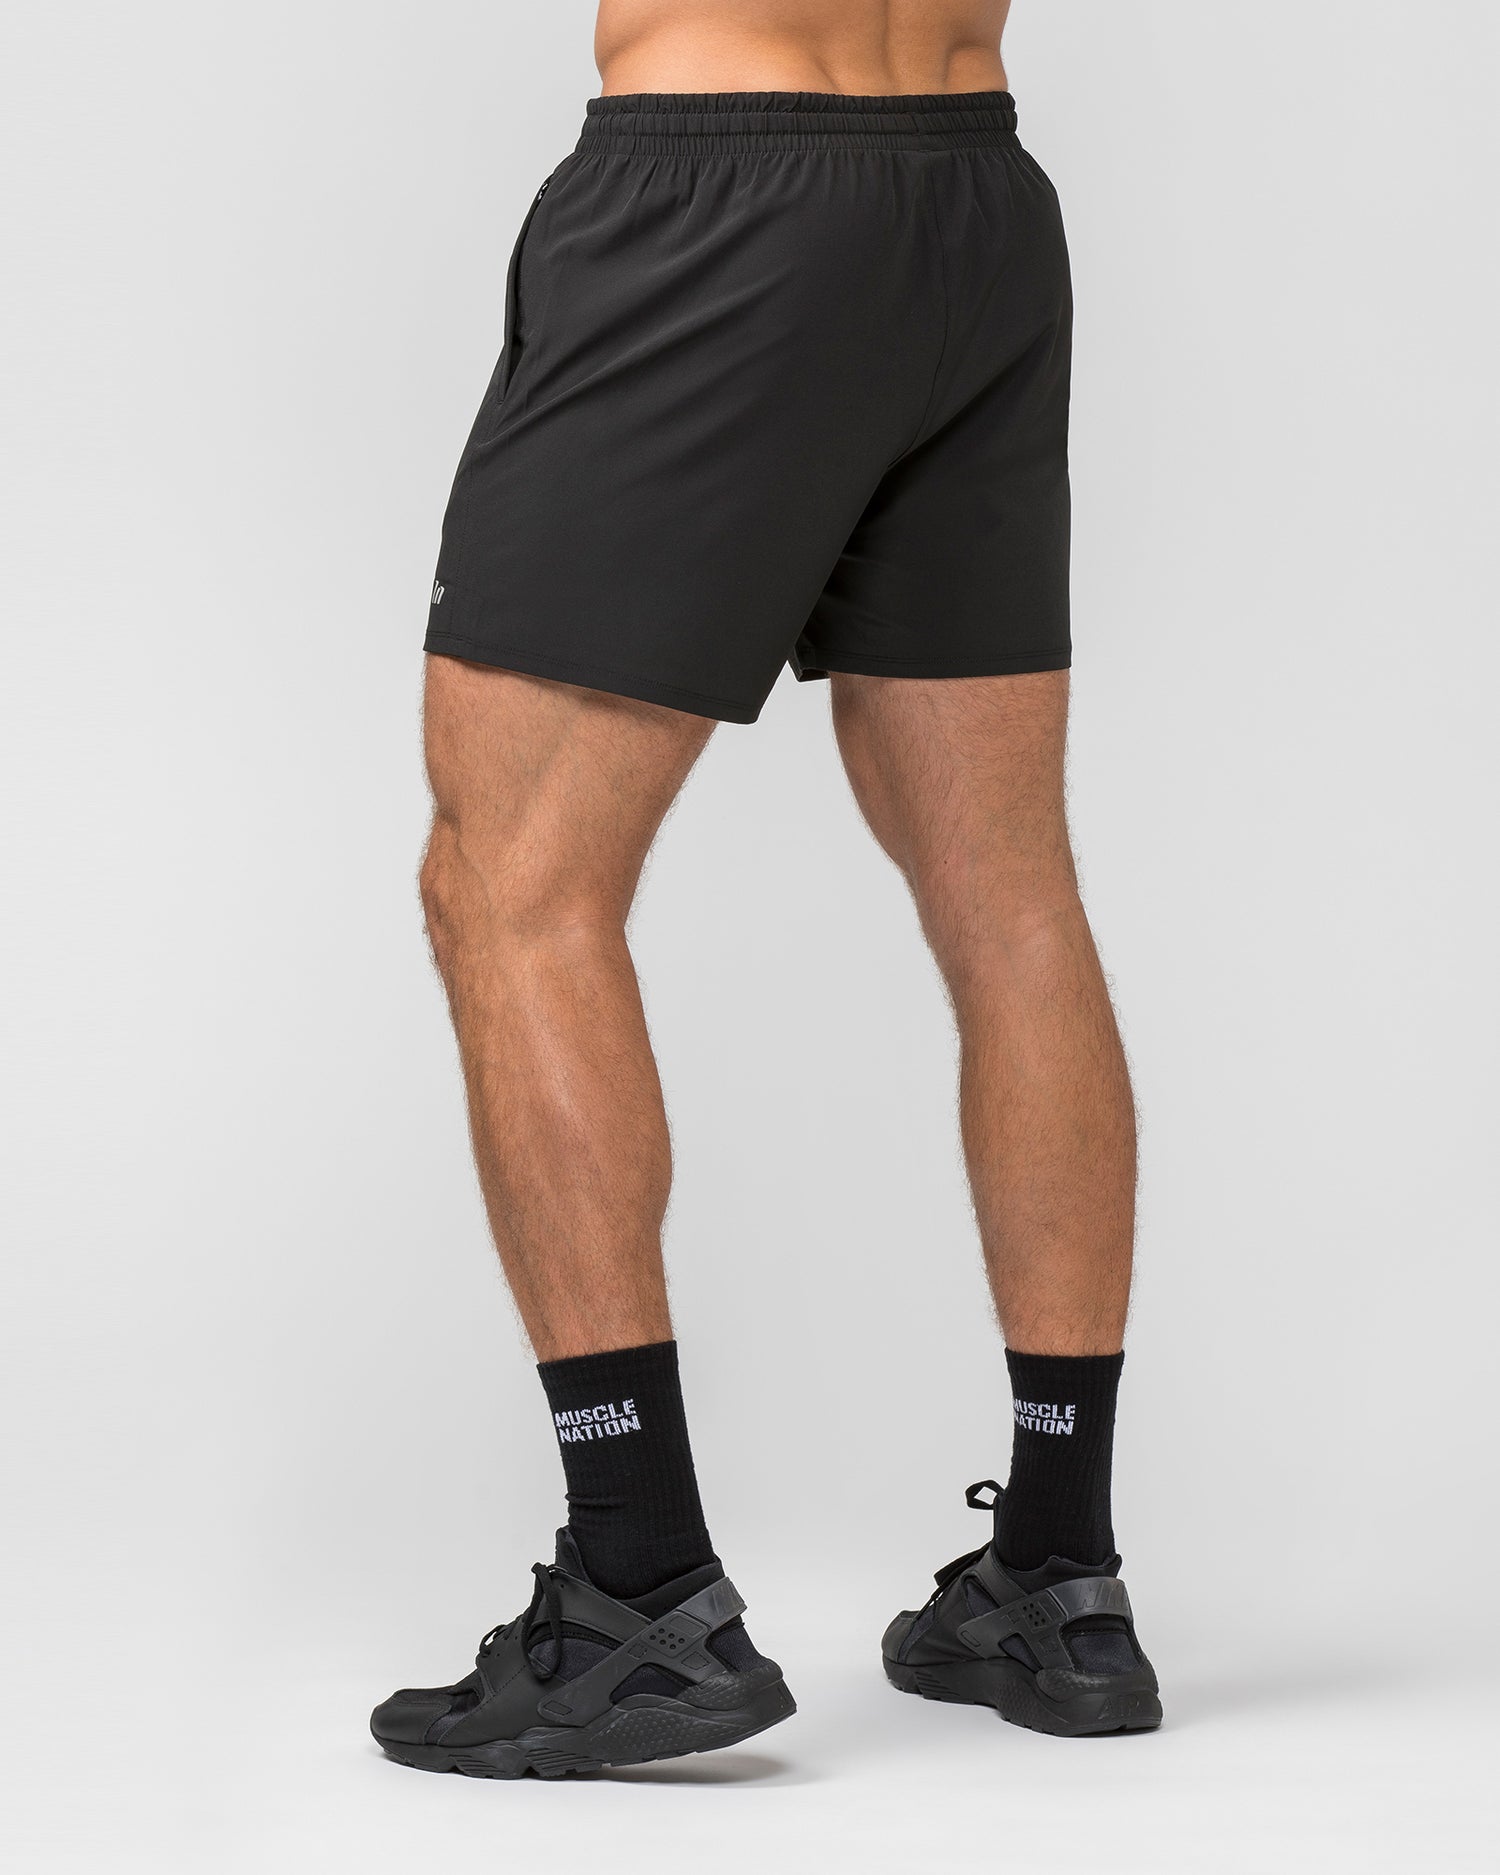 New Heights 4" Shorts - Black